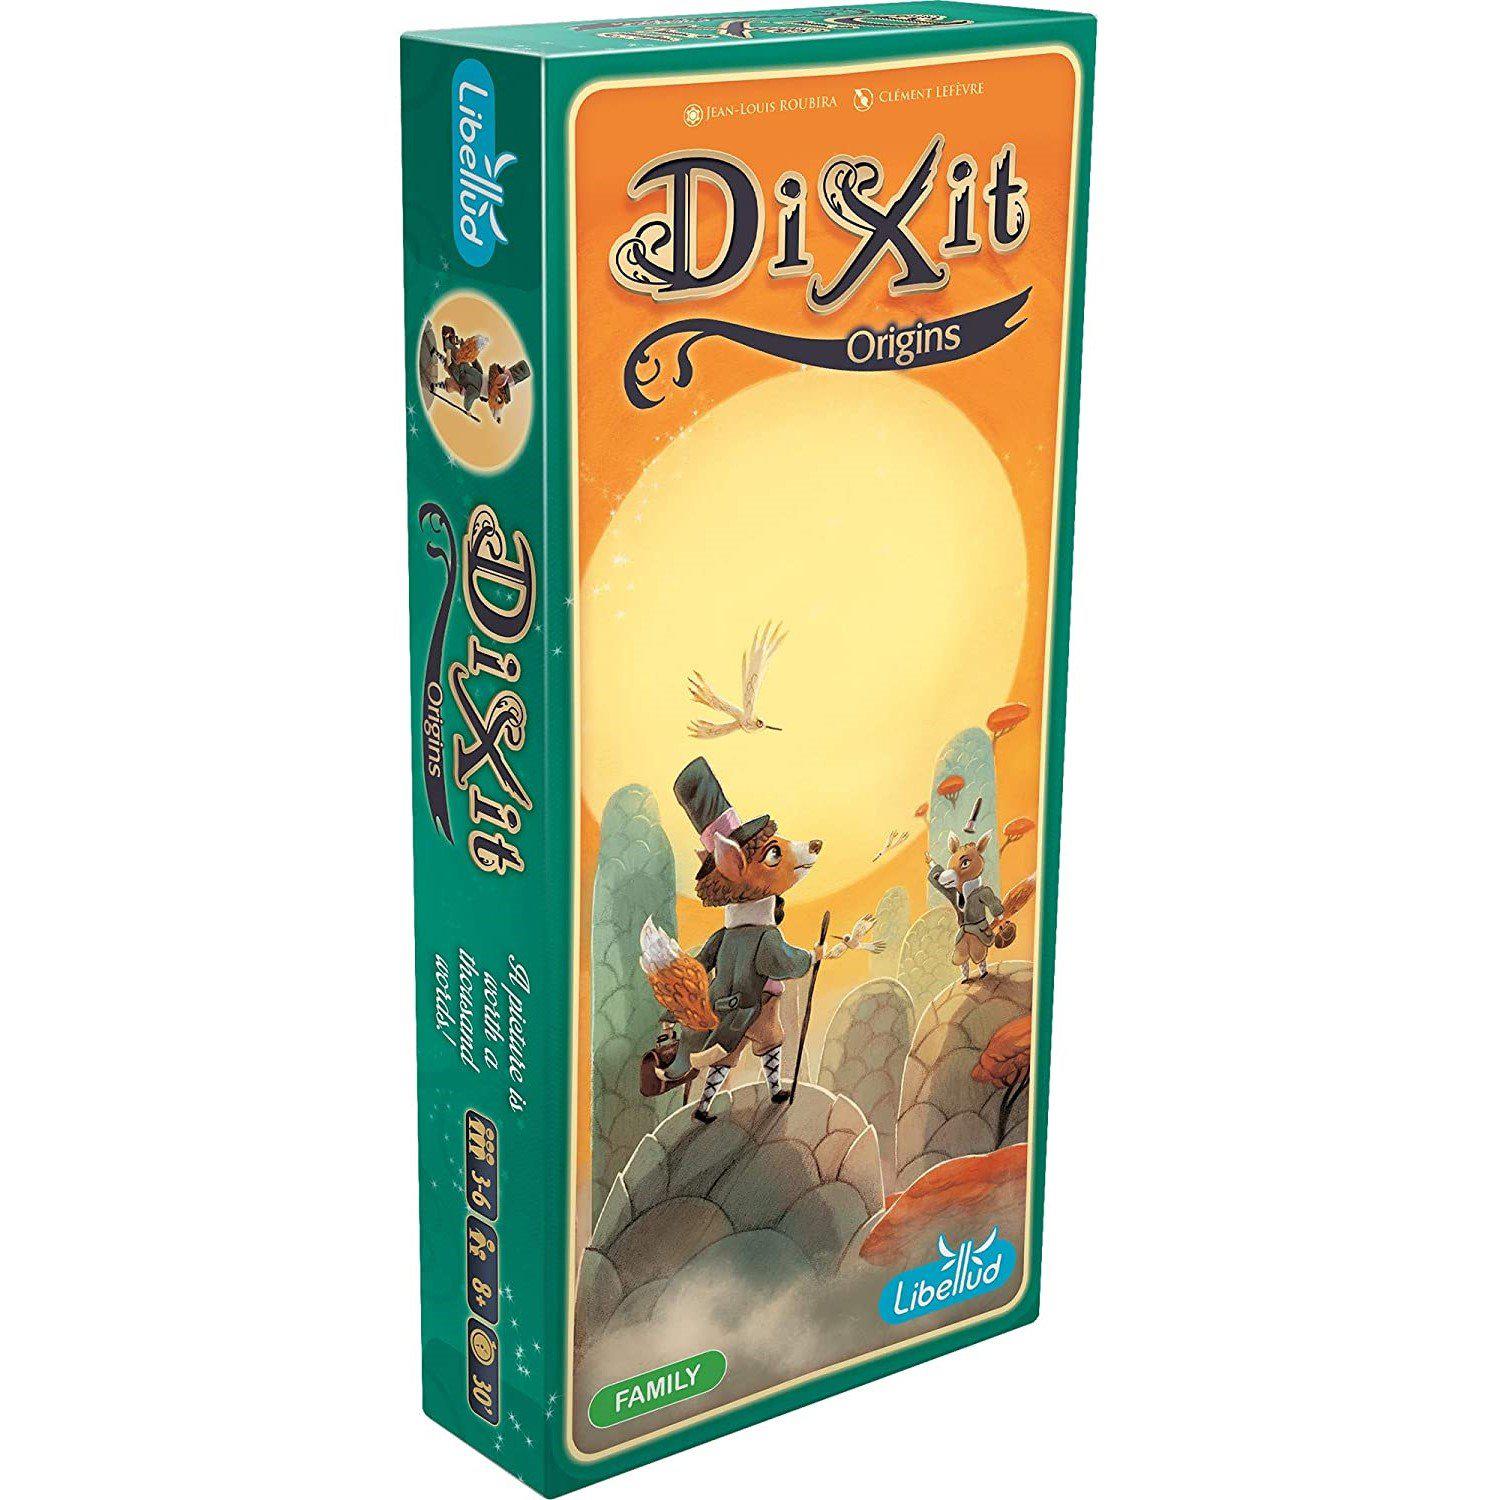 Box packaging for Dixit Origins